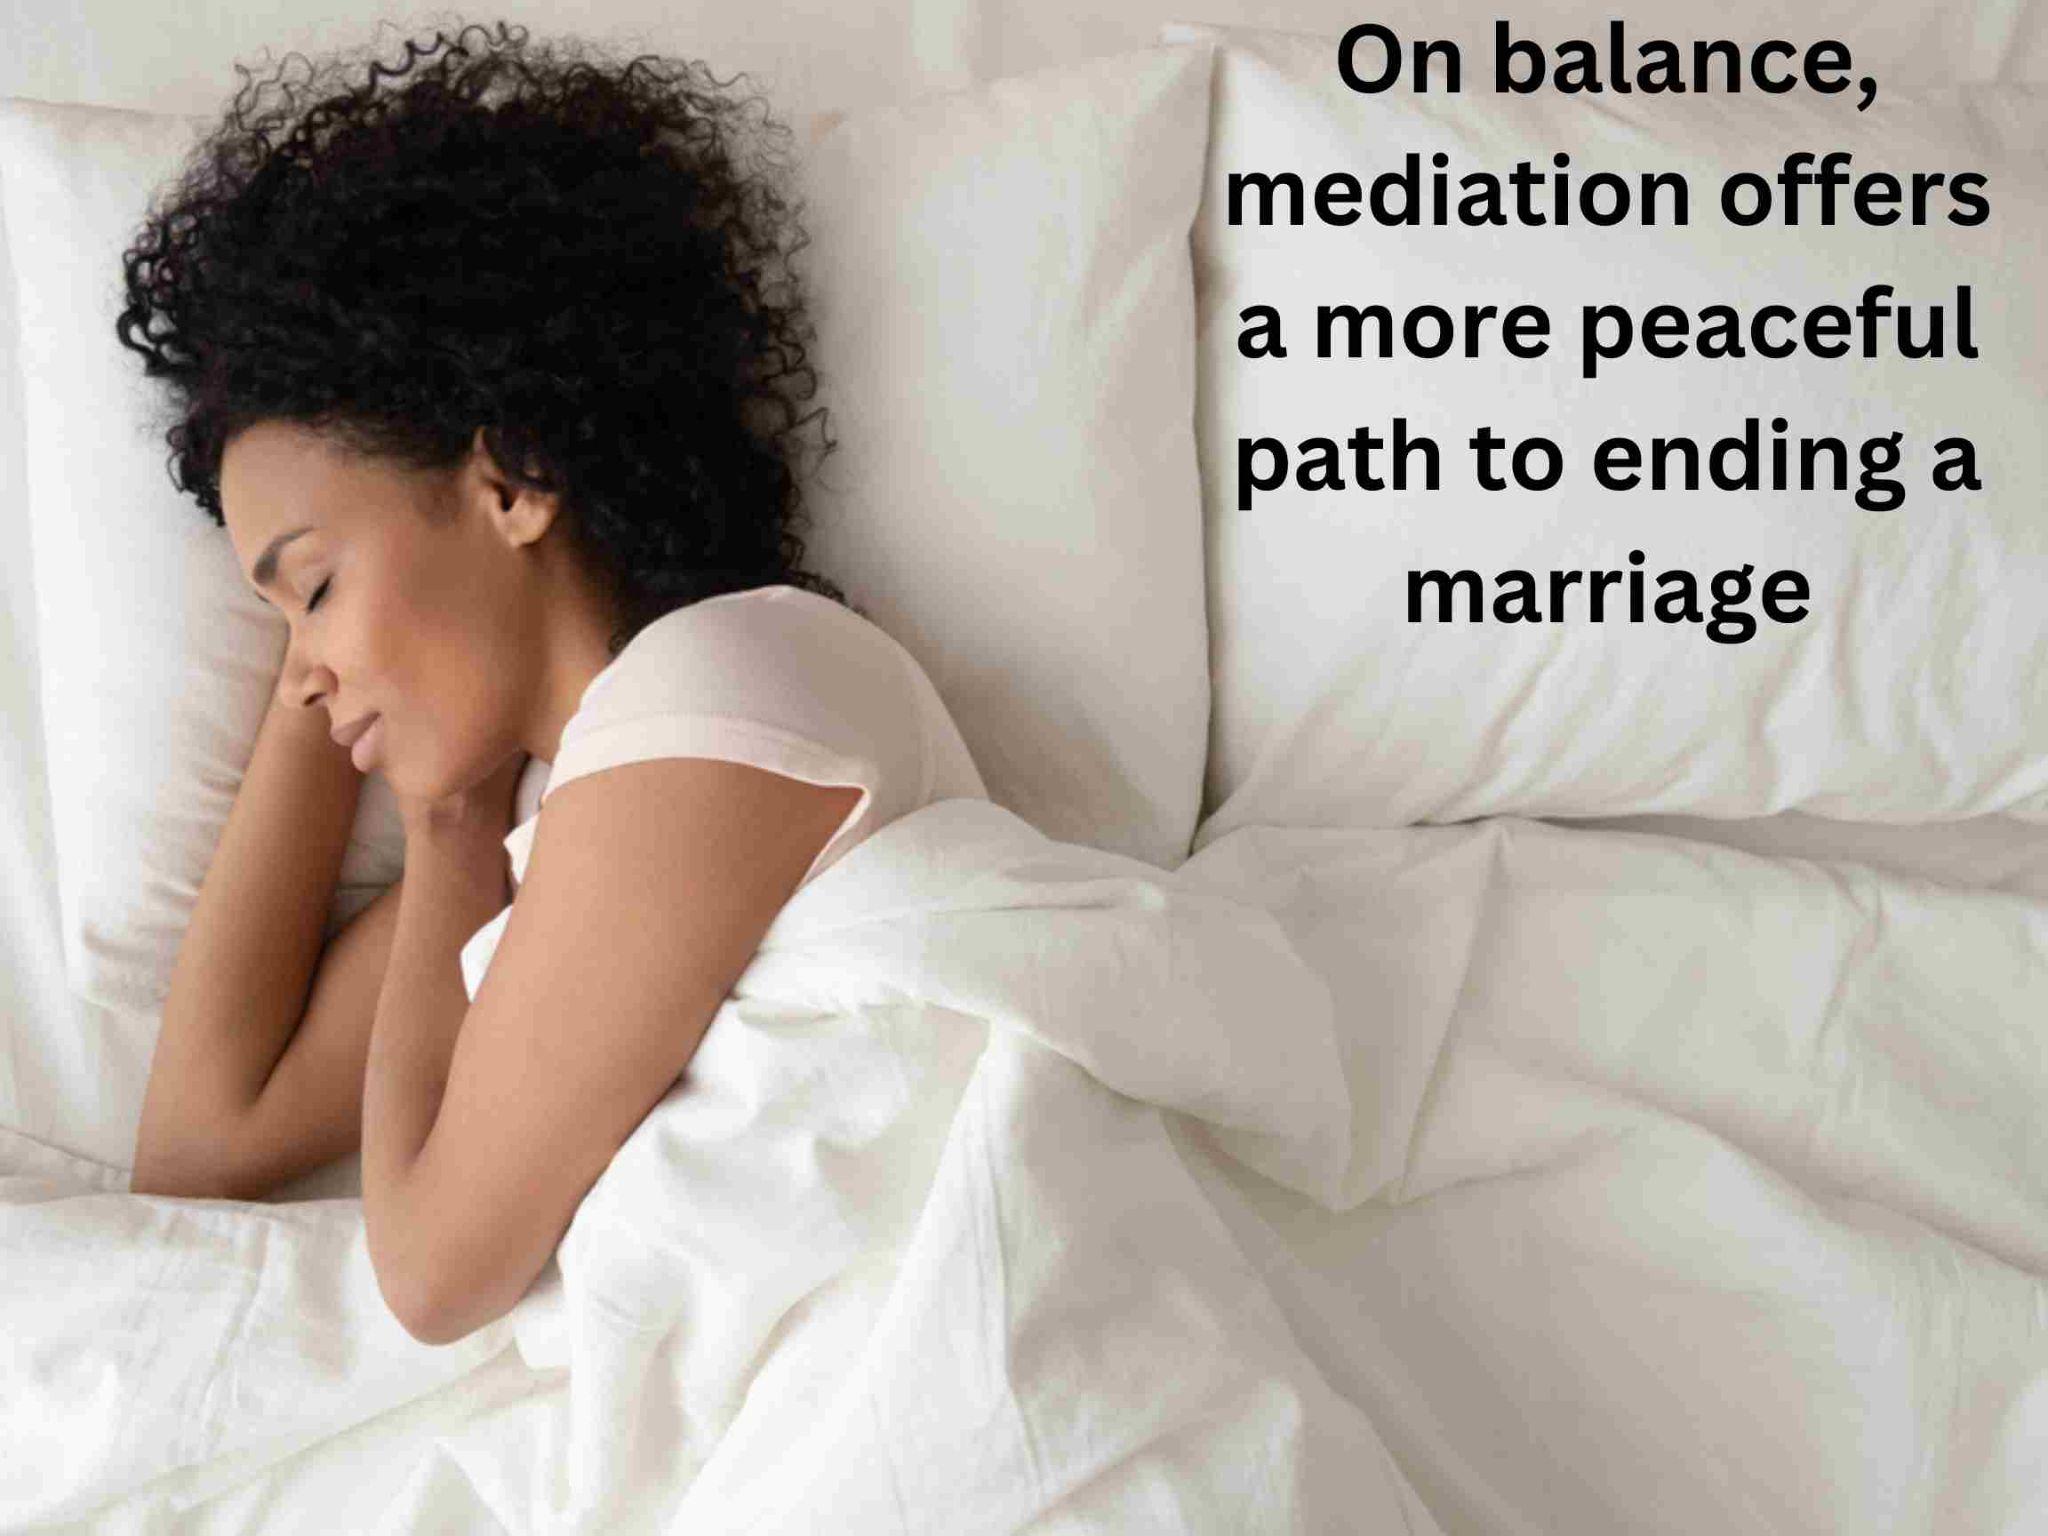 A person with curly hair is peacefully sleeping on white bedding with the text "On balance, mediation offers a more peaceful path to ending a marriage and handling divorce" beside them.